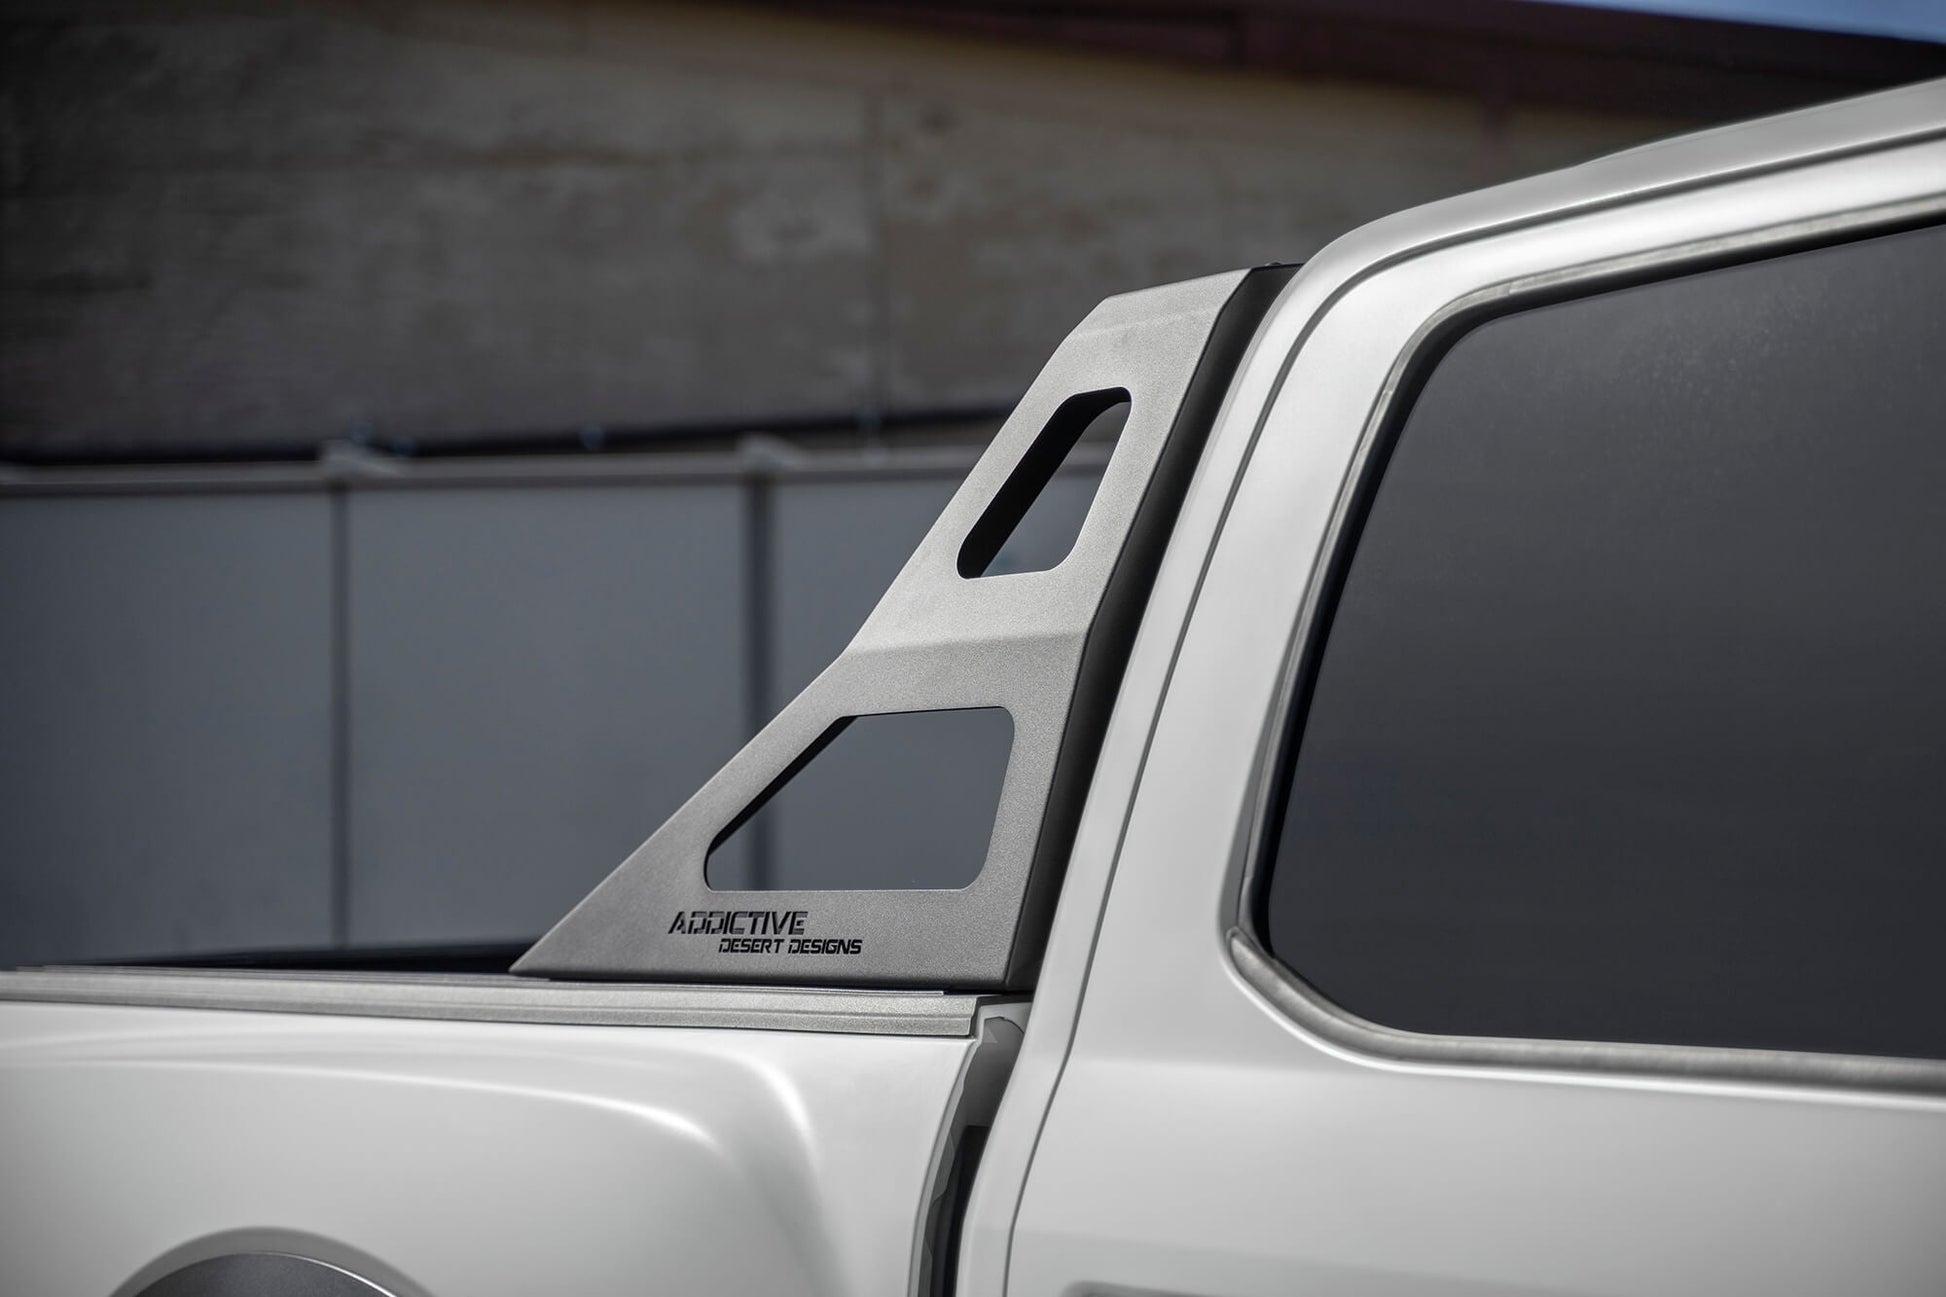 Installed on Car ADD Ford Stealth Fighter Chase Rack | Heritage | 2015-2023 F-150/Raptor